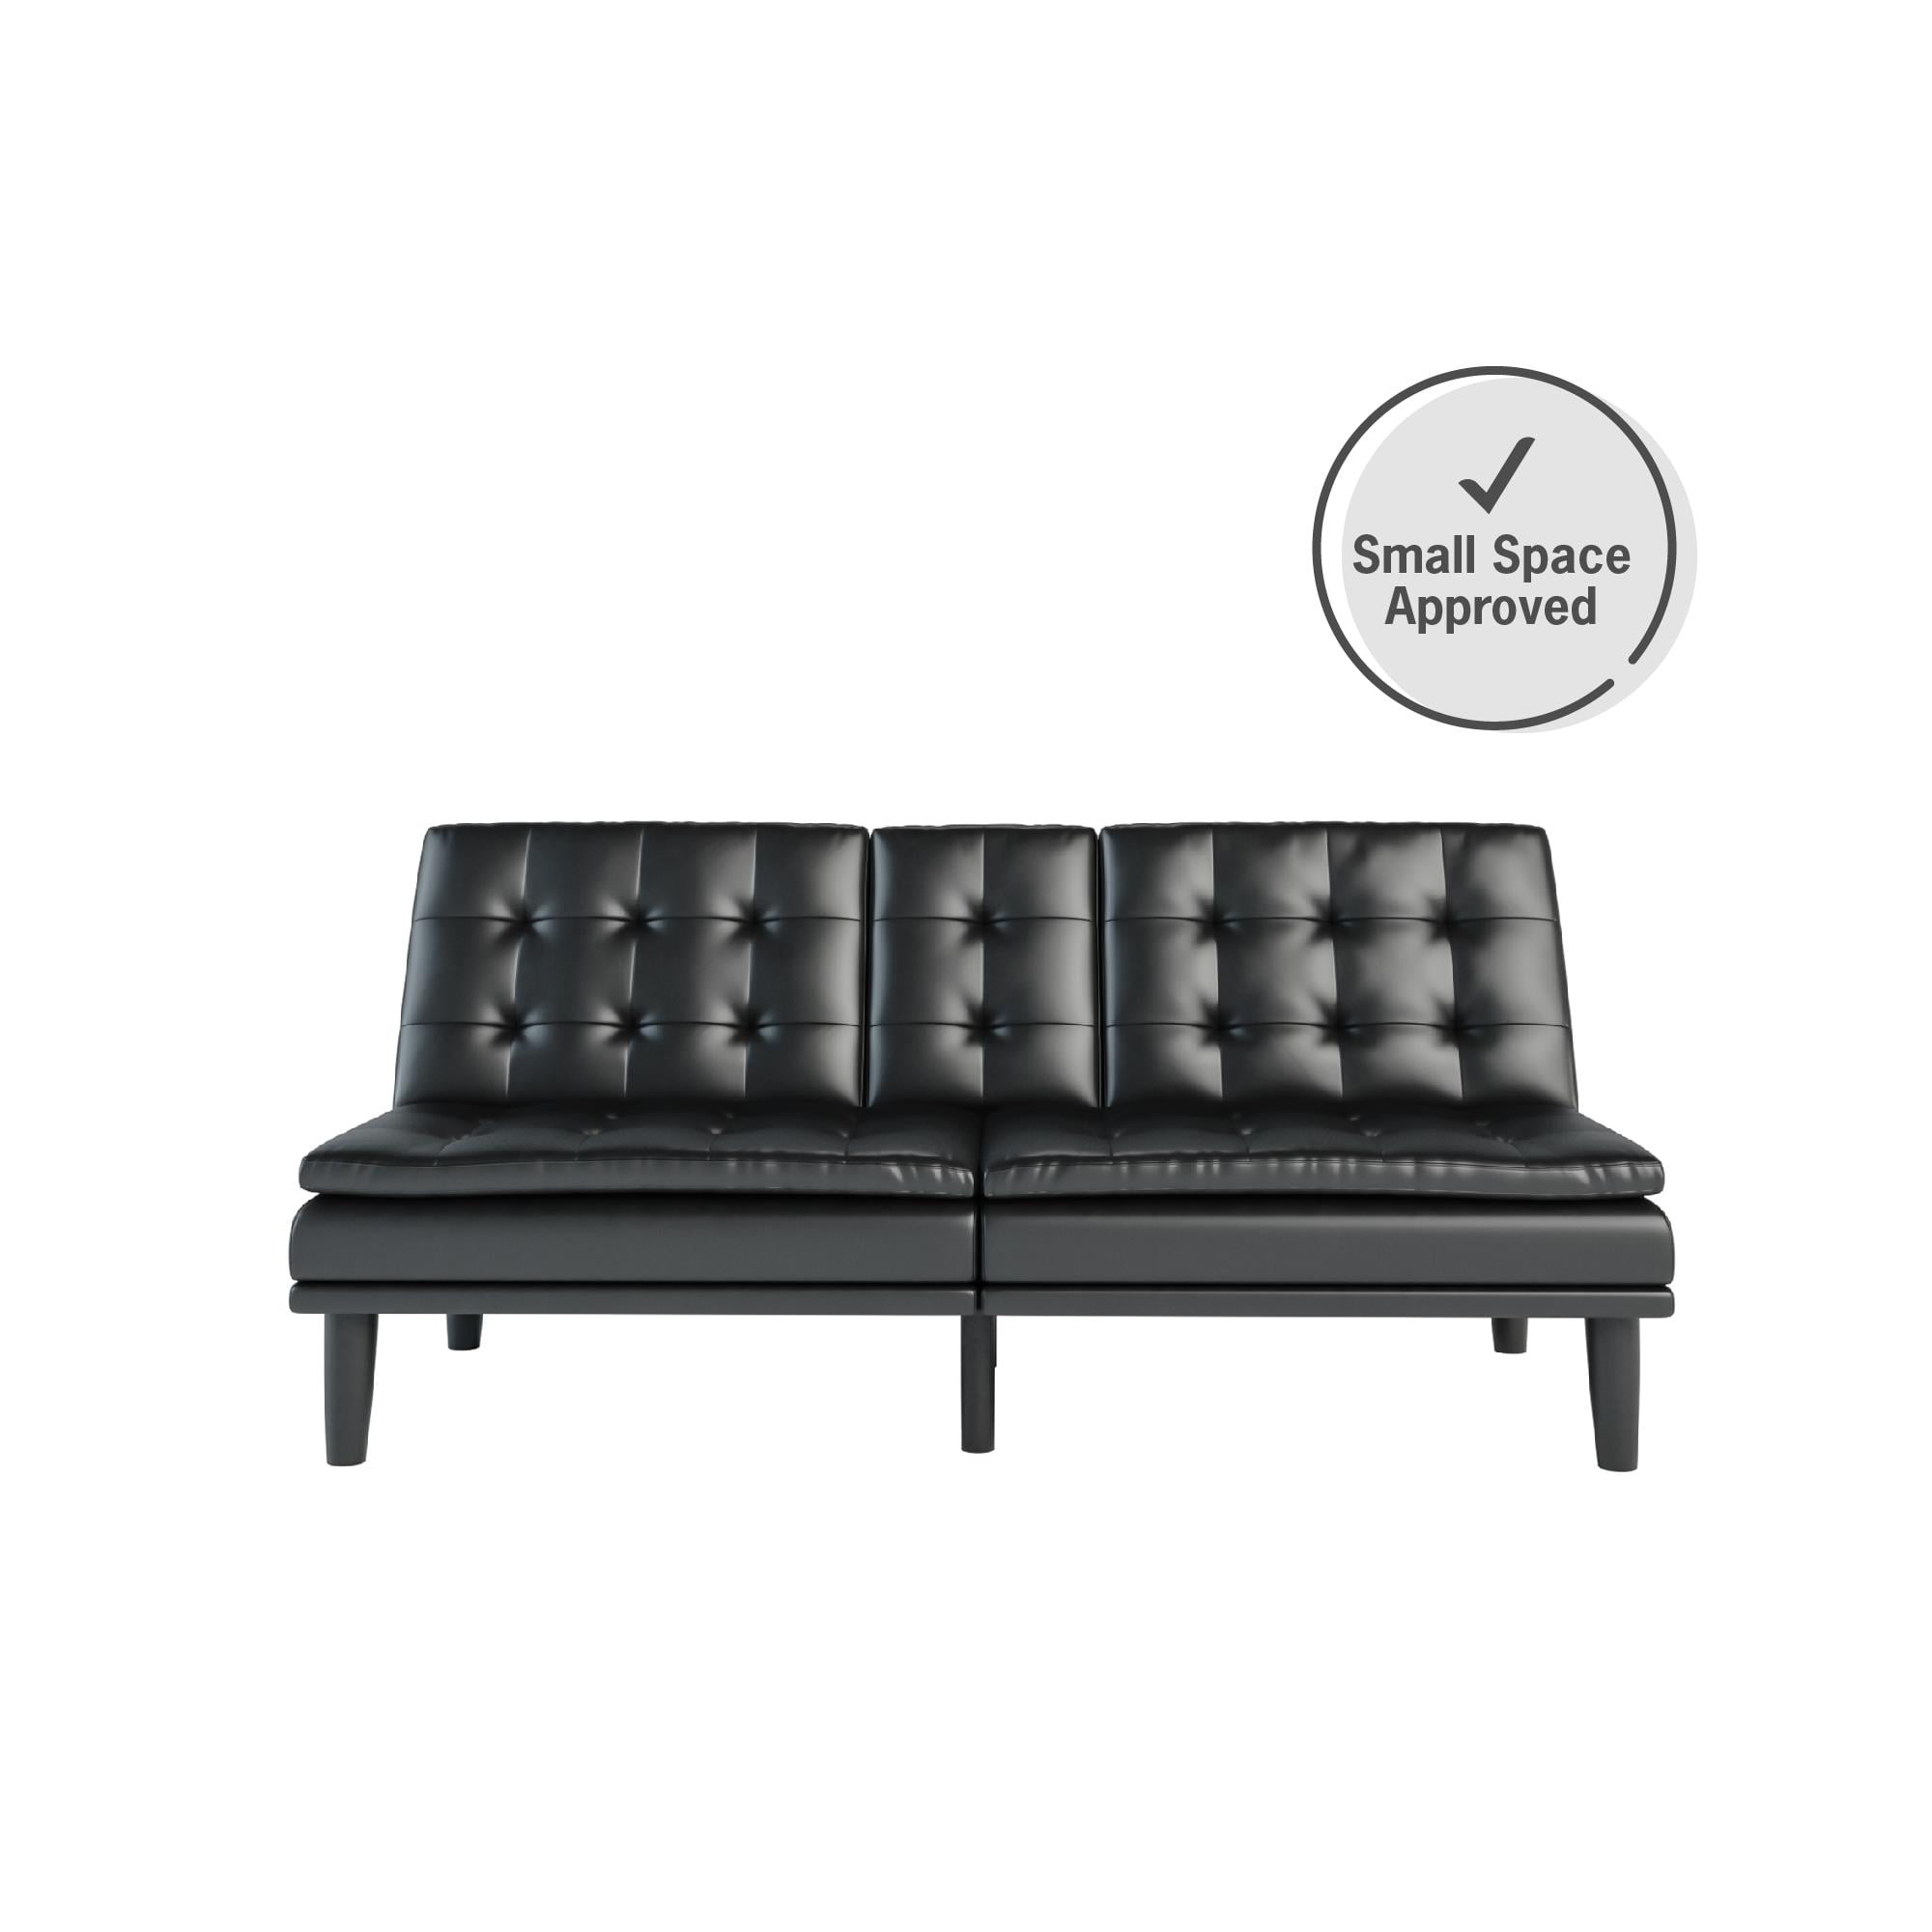 Mainstays Memory Foam Faux Leather, Black Faux Leather Futon With Cup Holders